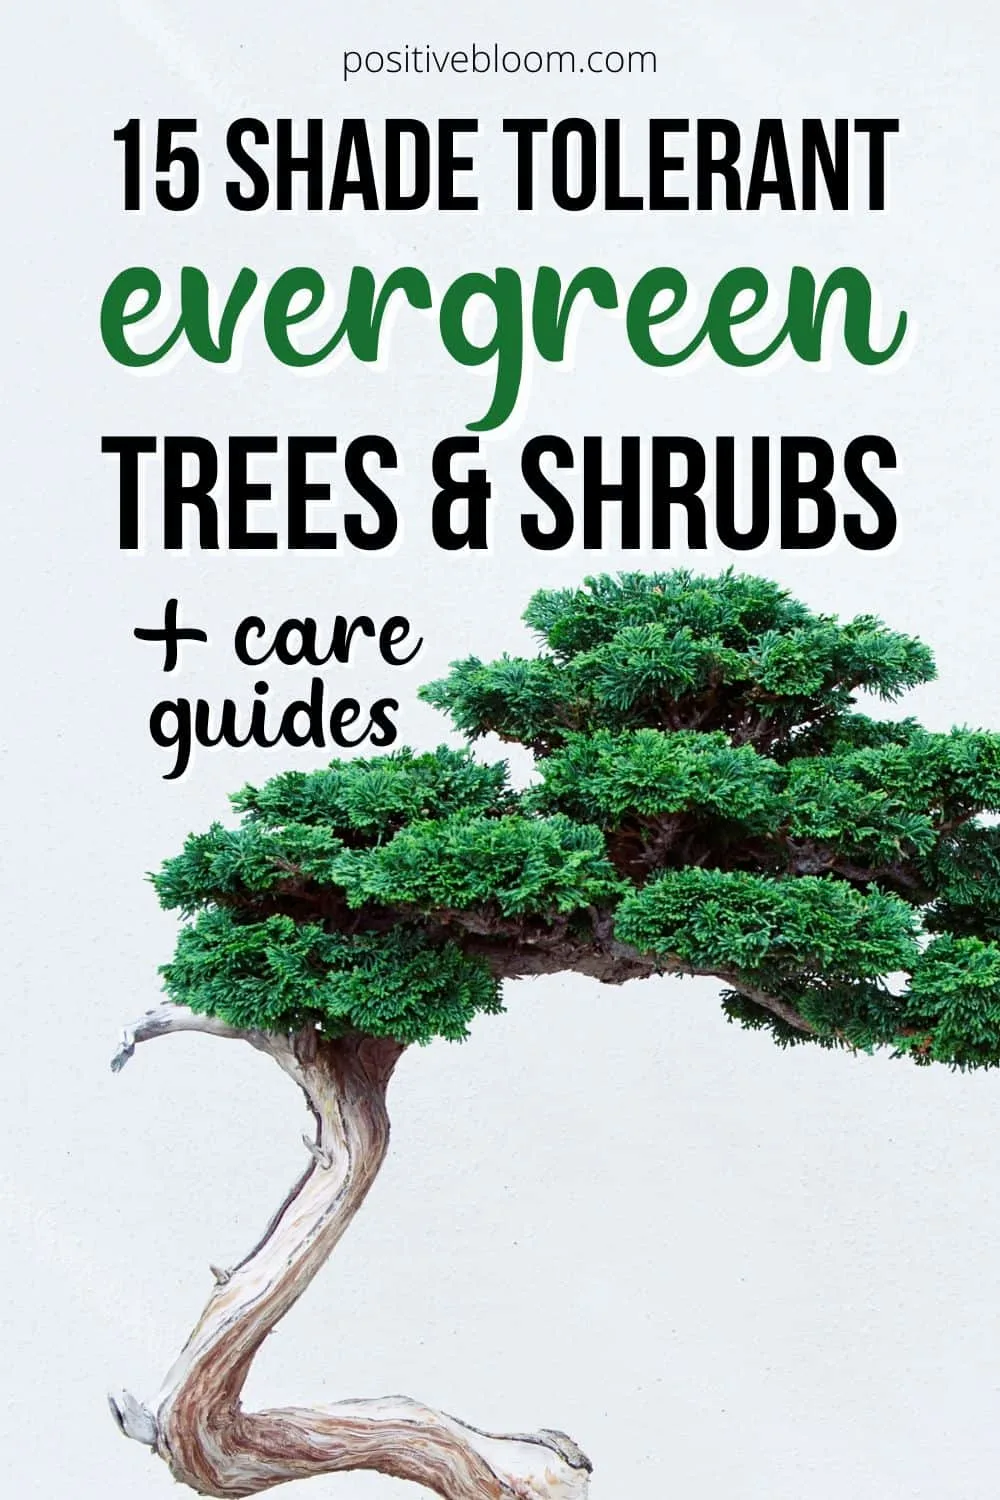 15 Shade Tolerant Evergreen Trees And Shrubs + Care Guides Pinterest (1)